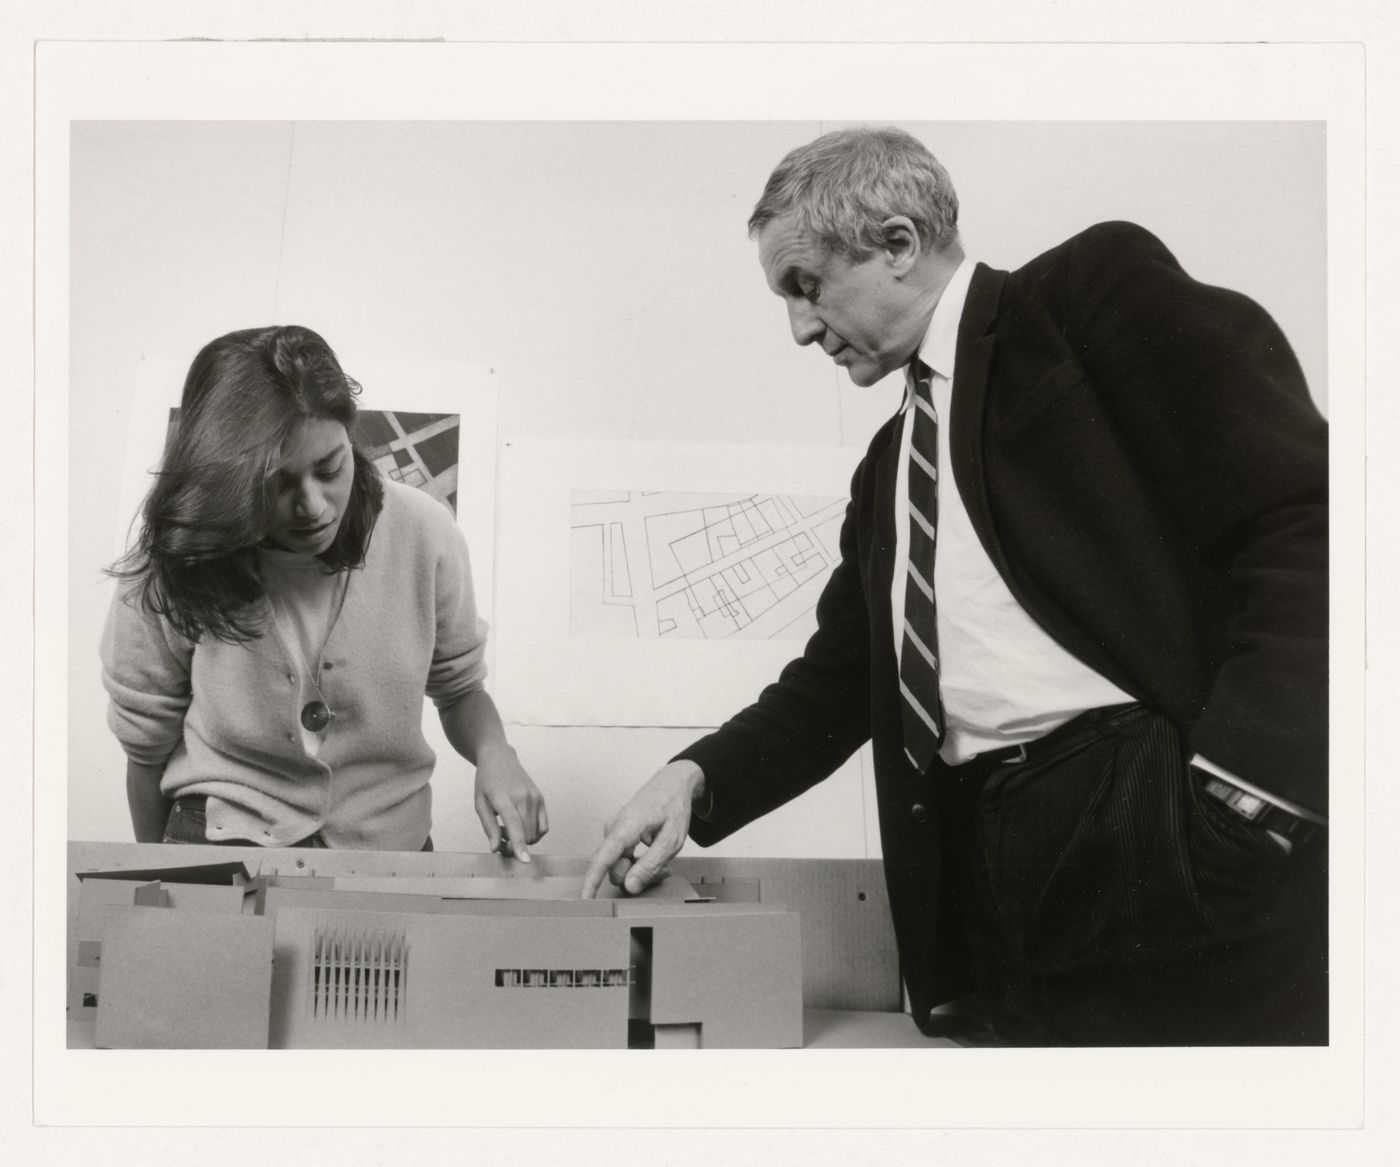 Kenneth Frampton and unidentified person (student?) looking at a model